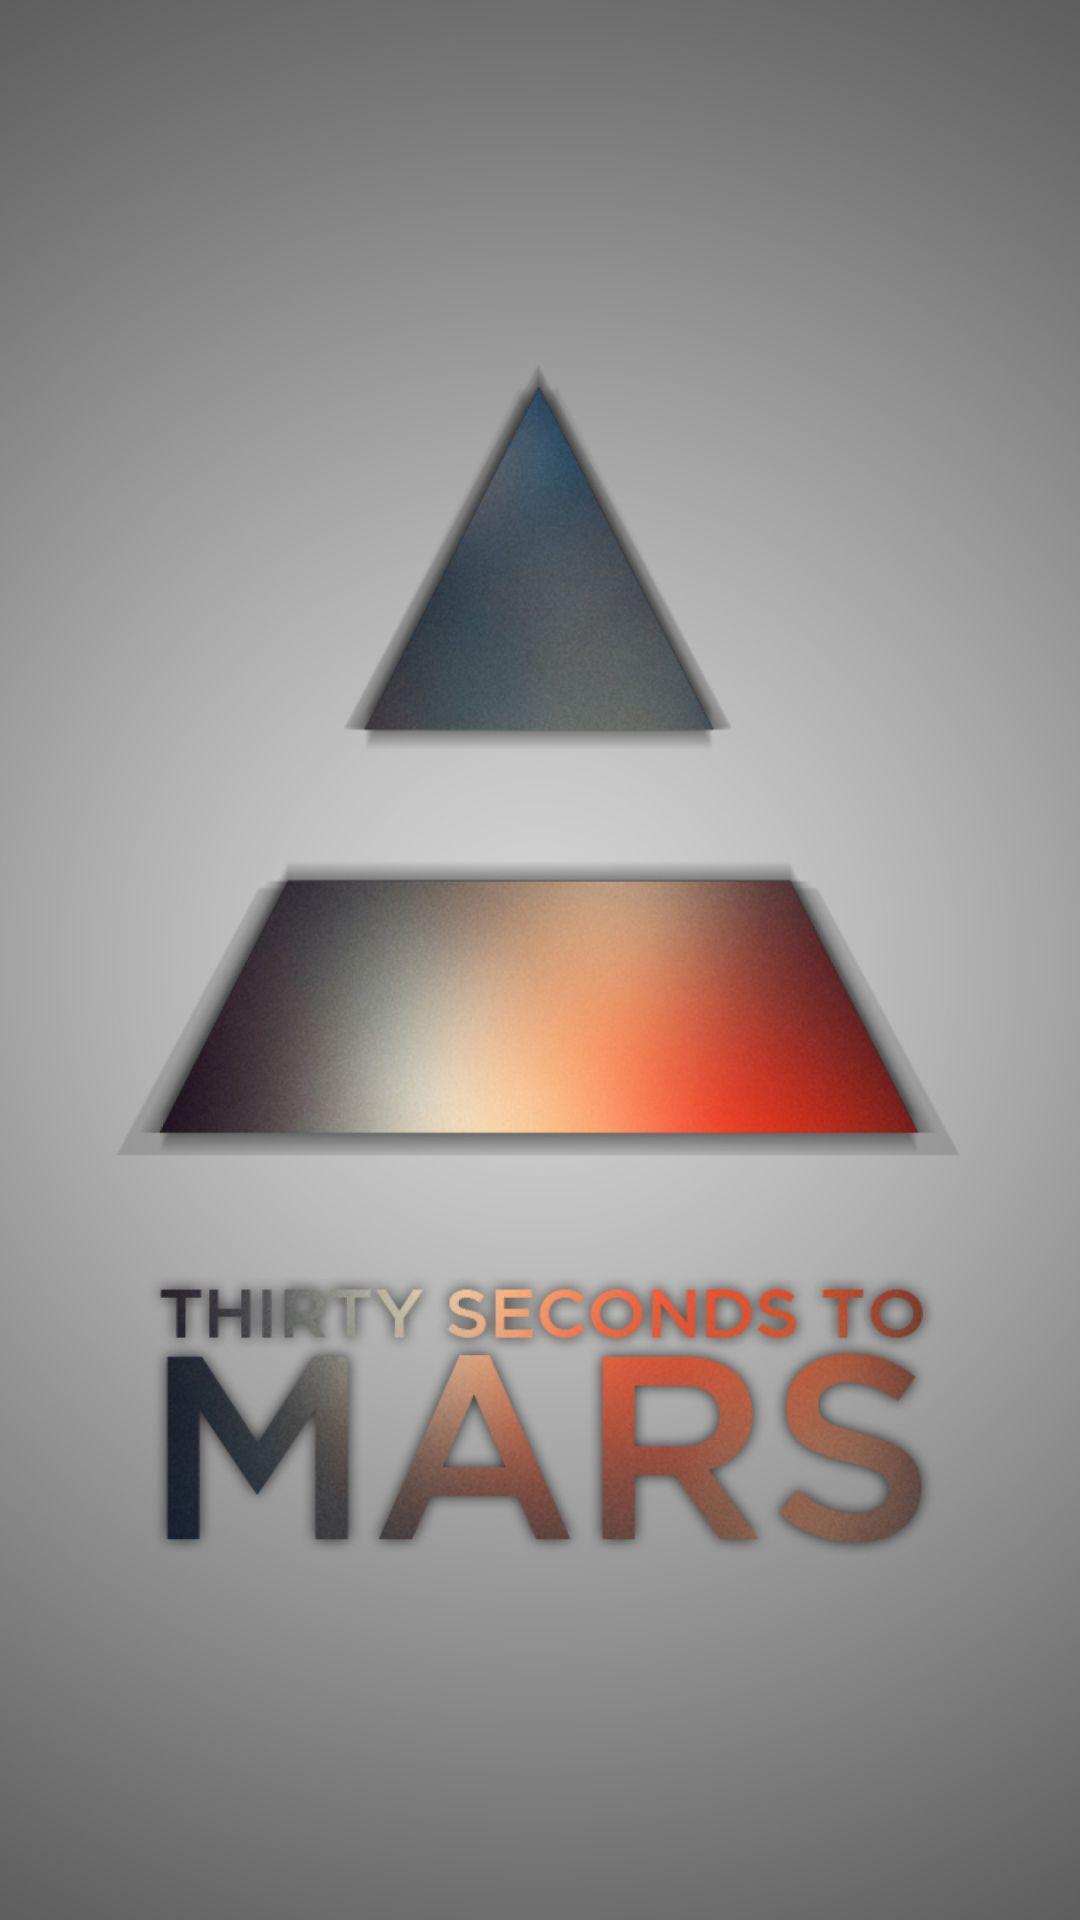 30 Seconds to Mars Logo - Thirty Seconds To Mars Wallpapers - Wallpaper Cave